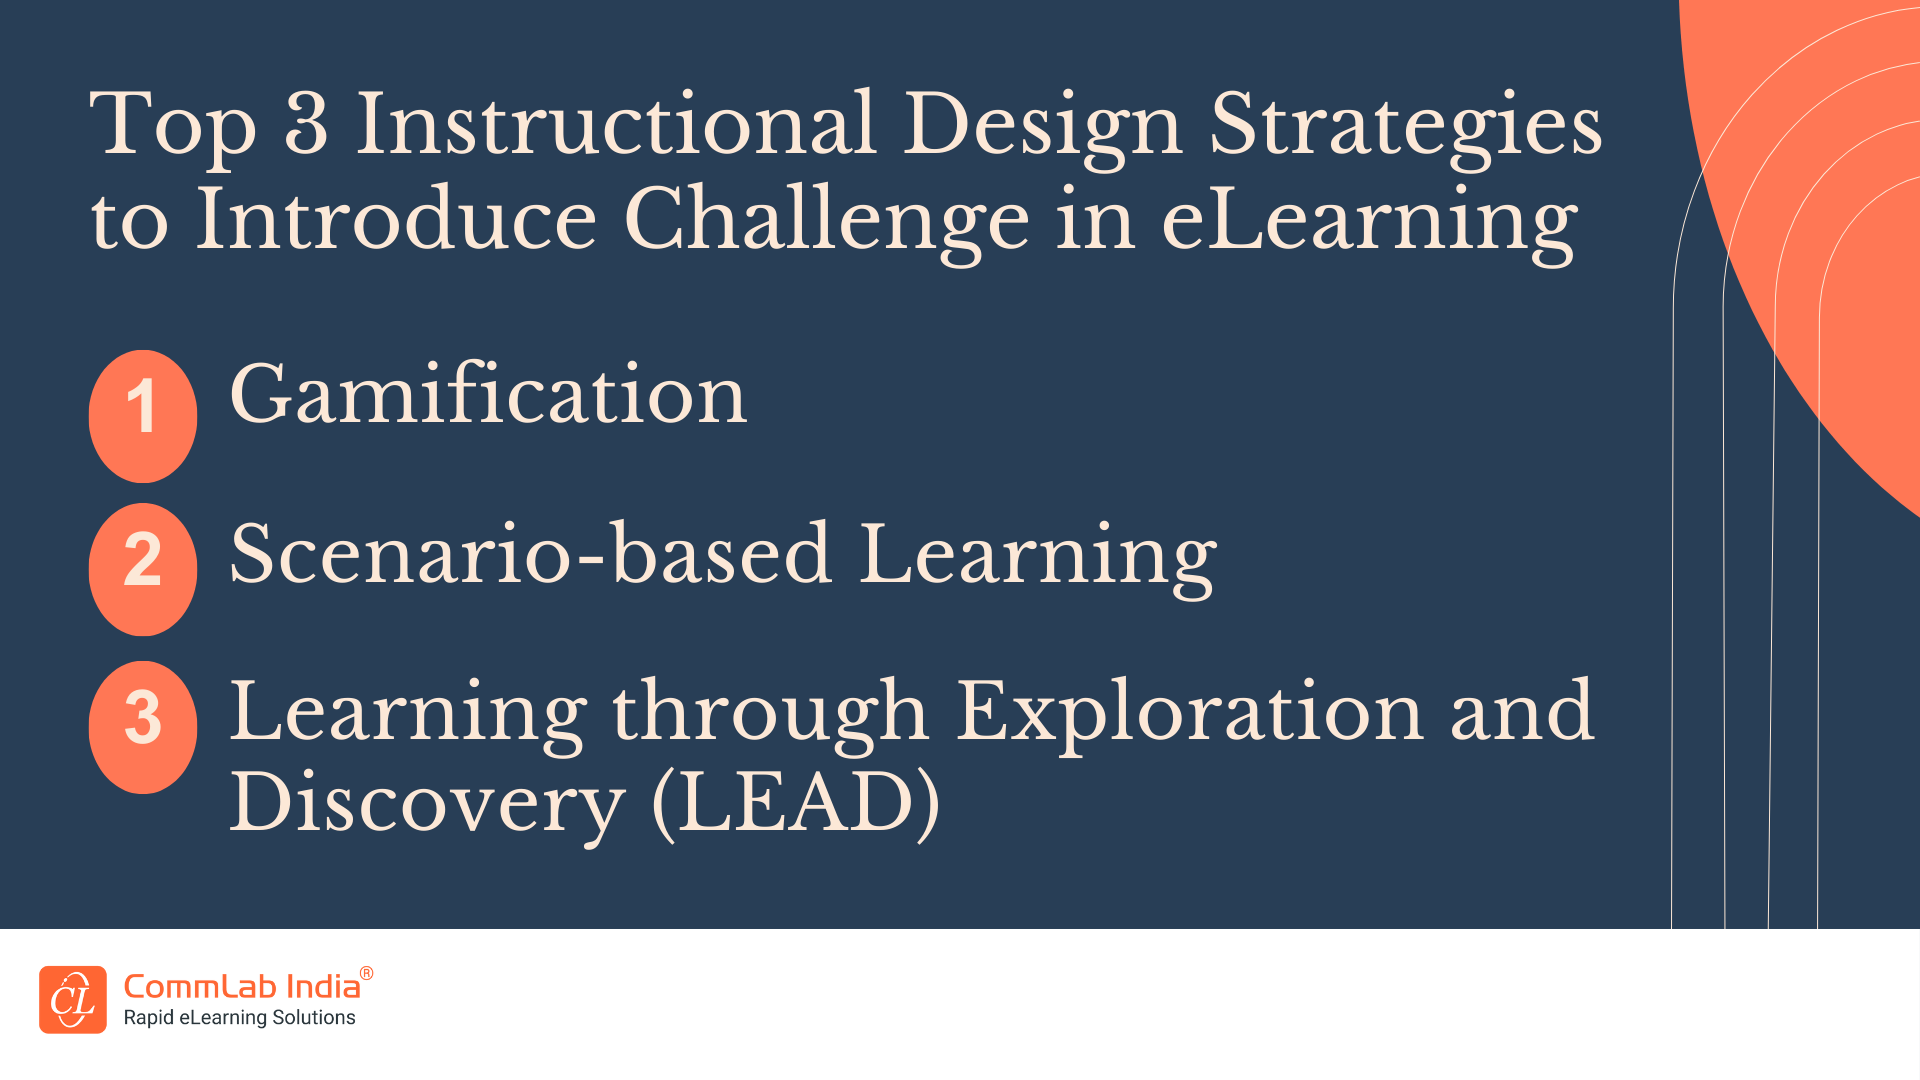 Top 3 Instructional Design Strategies to Introduce Challenge in eLearning